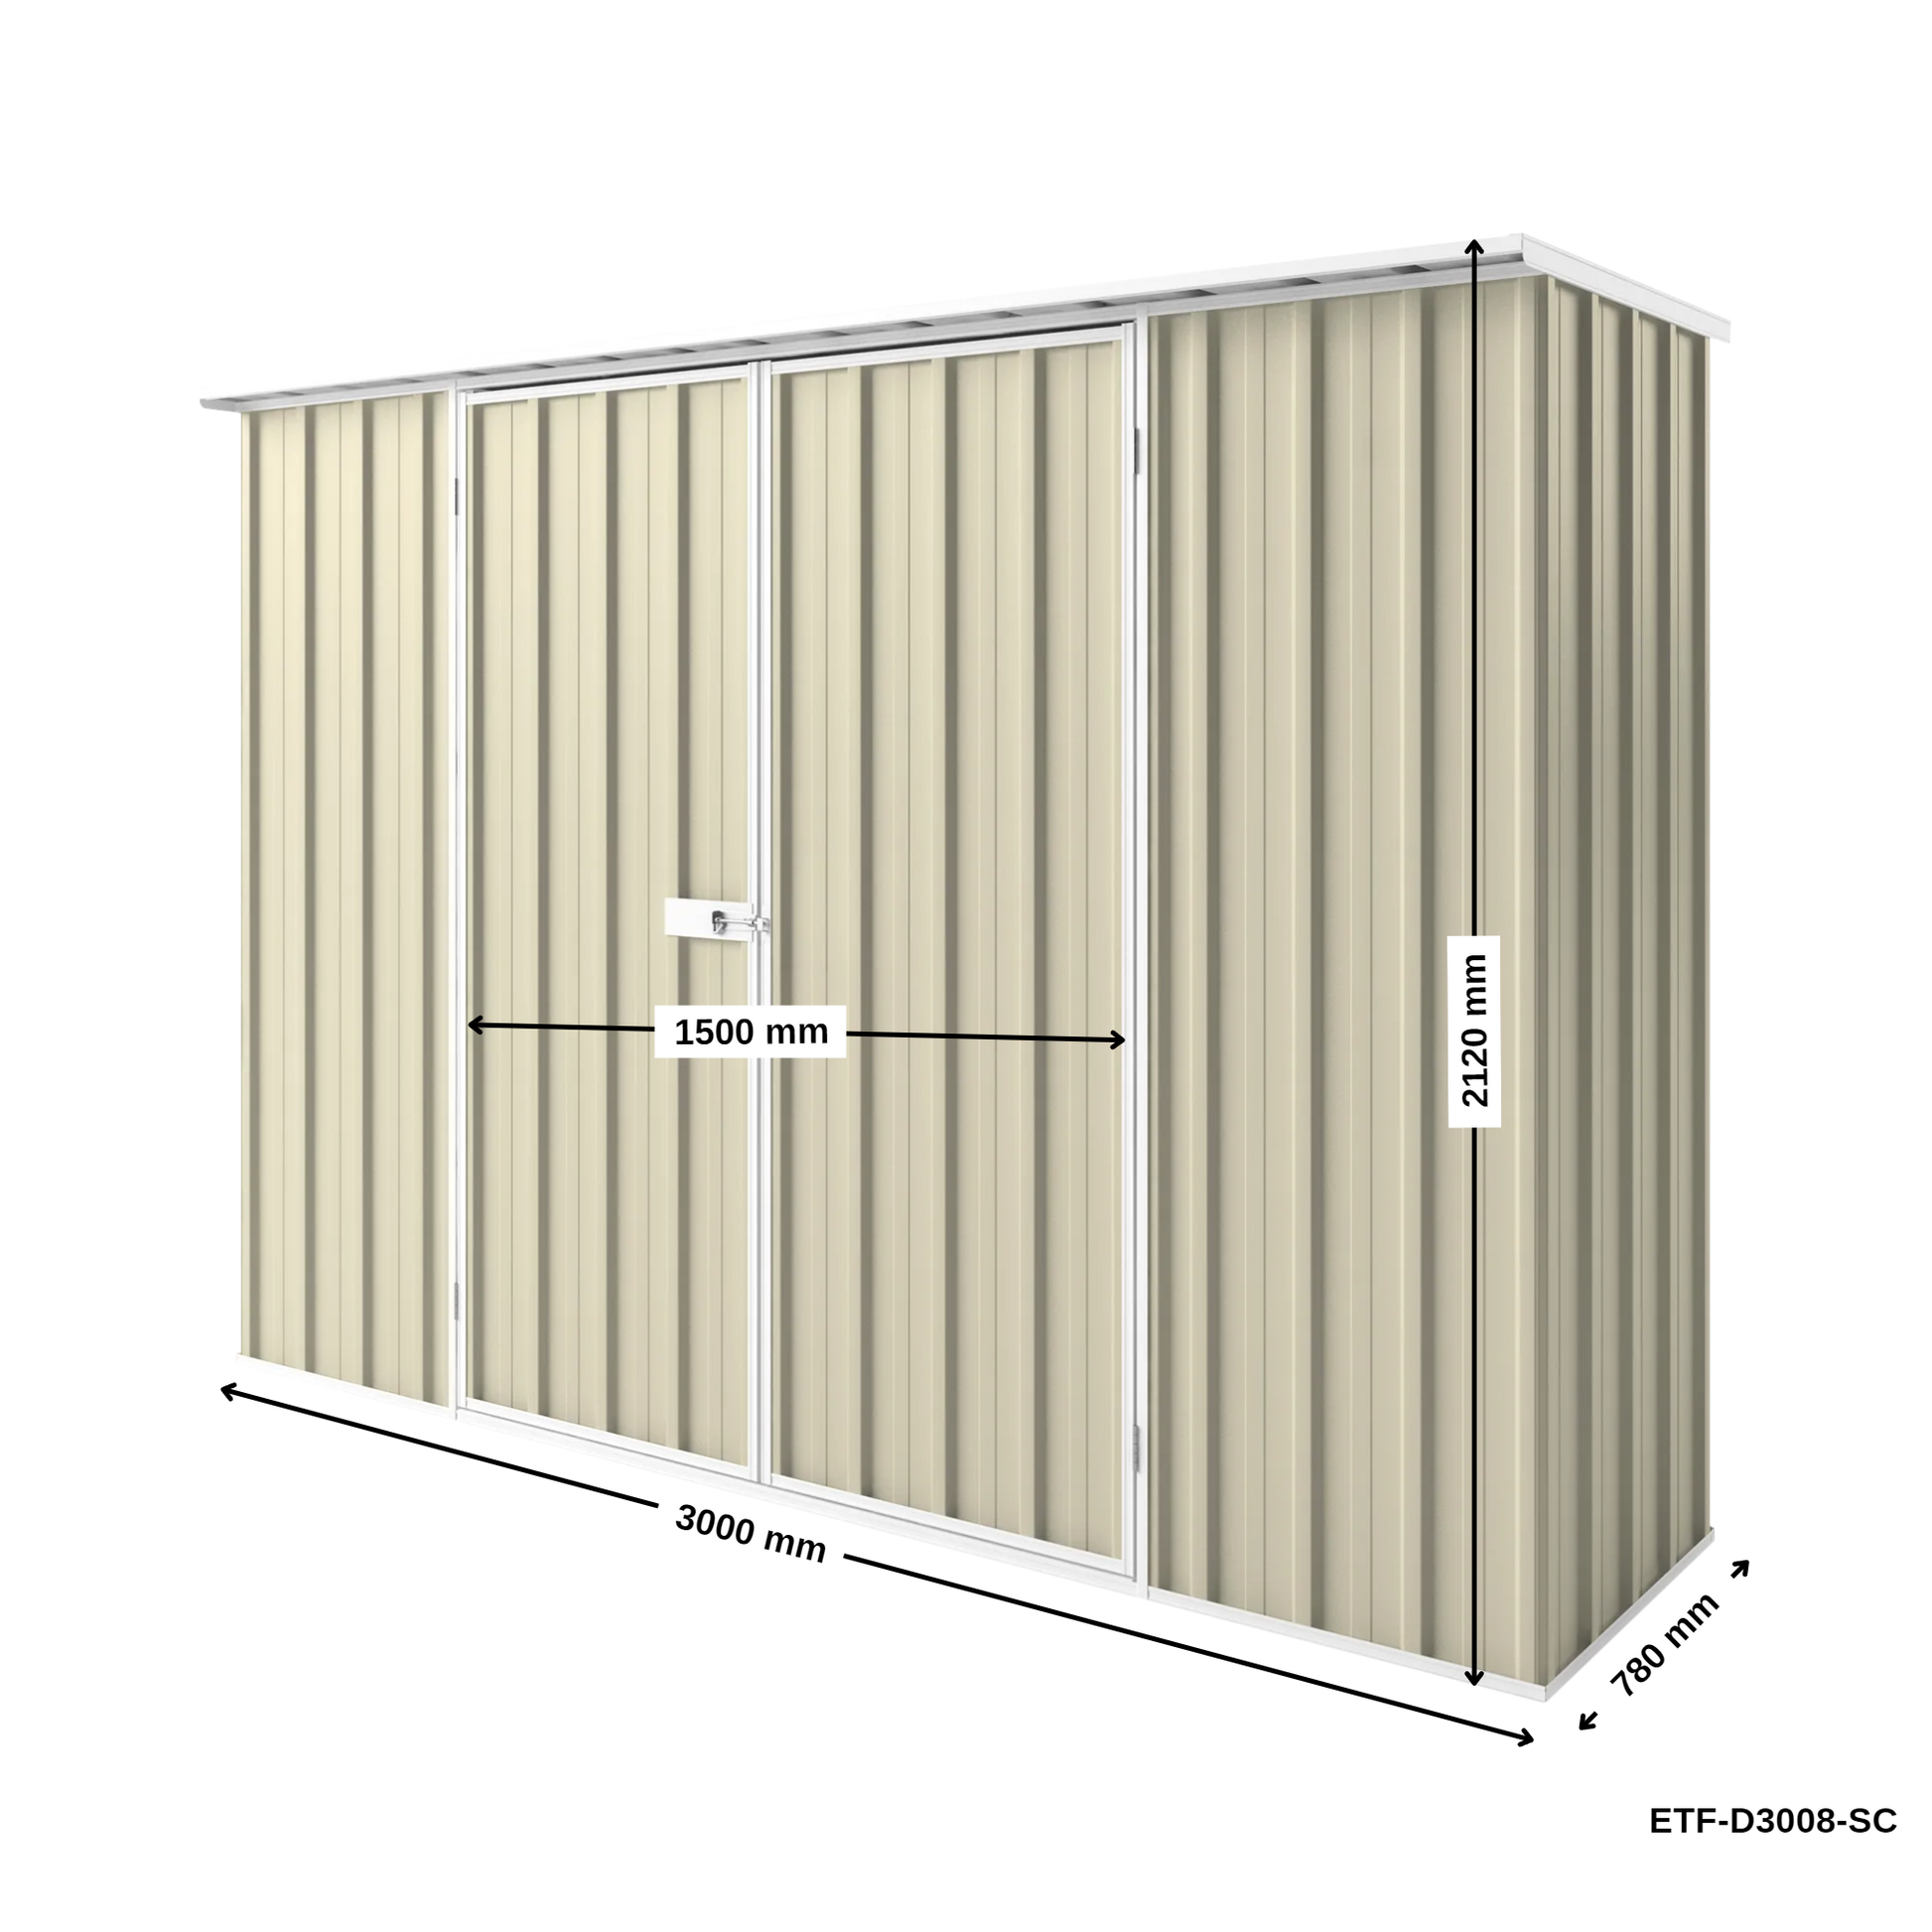 3m x 0.78m Flat Roof Garden Shed - EasyShed